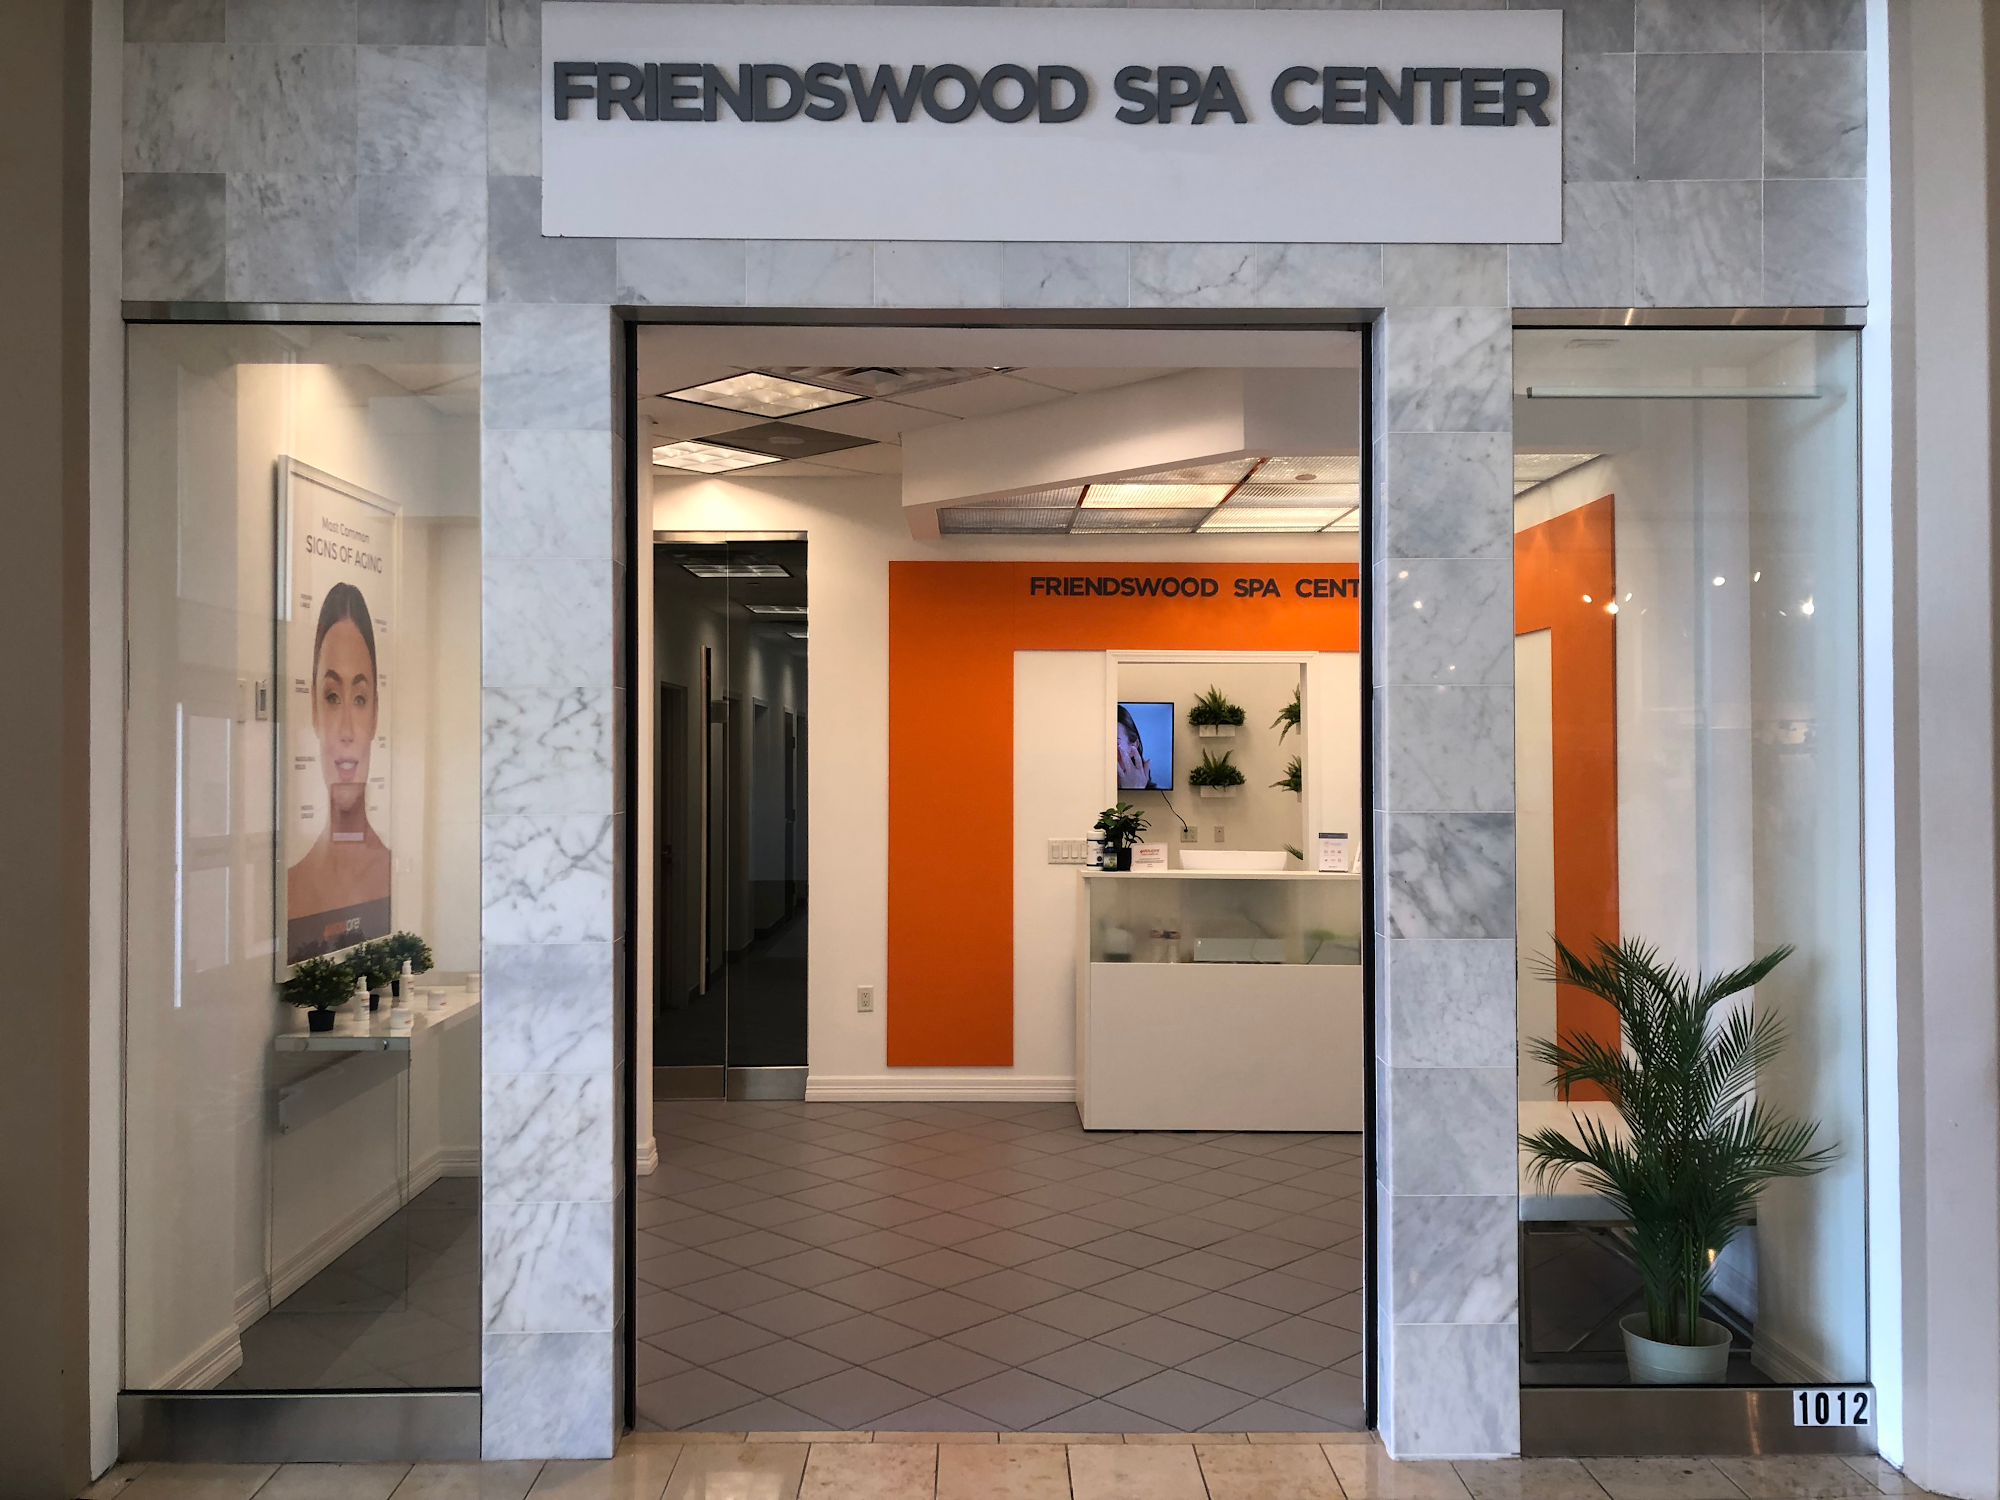 Friendswood Spa Center